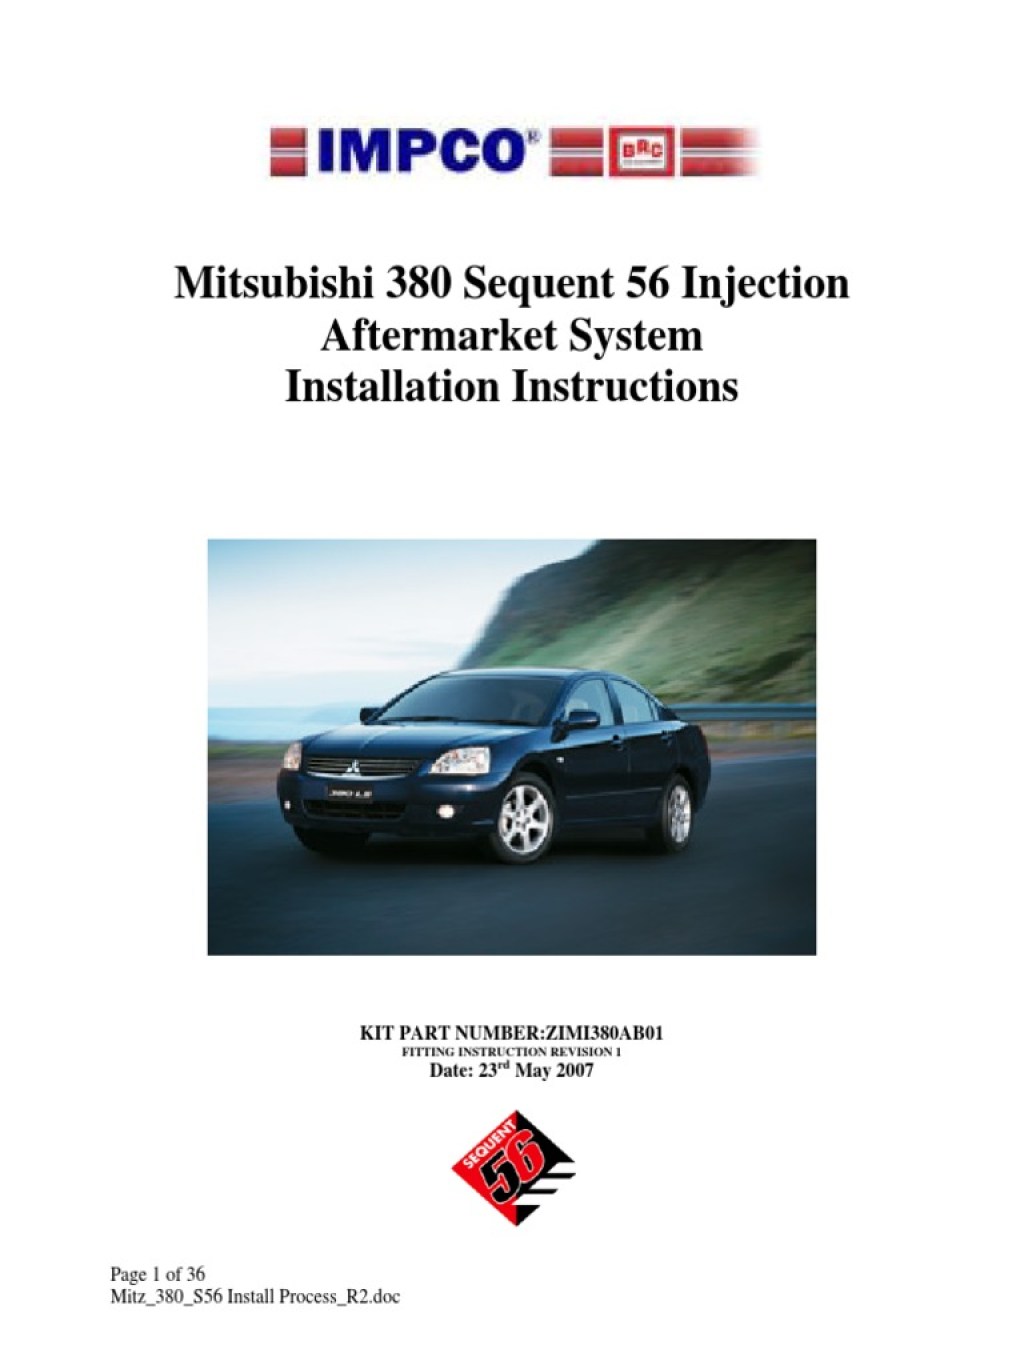 Picture of: Mitsubishi  Sequent  Injection  PDF  Electrical Connector